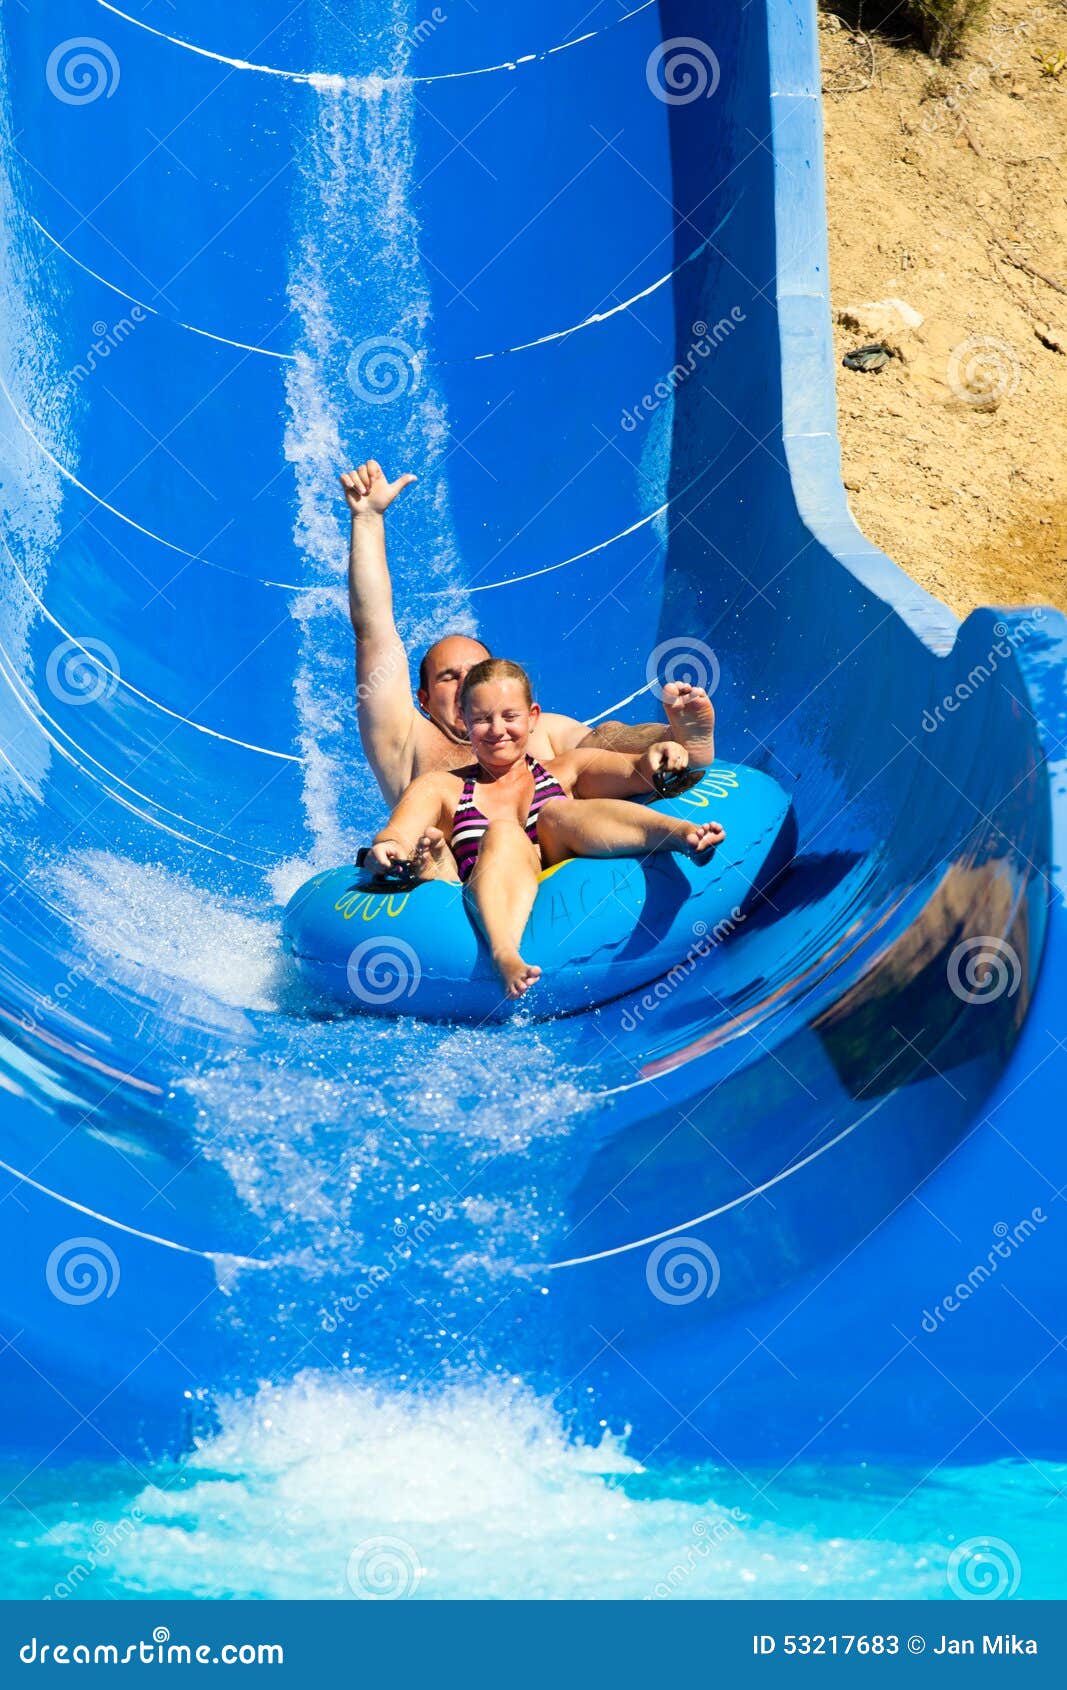 People At Water Park Stock Image Image Of Outdoor